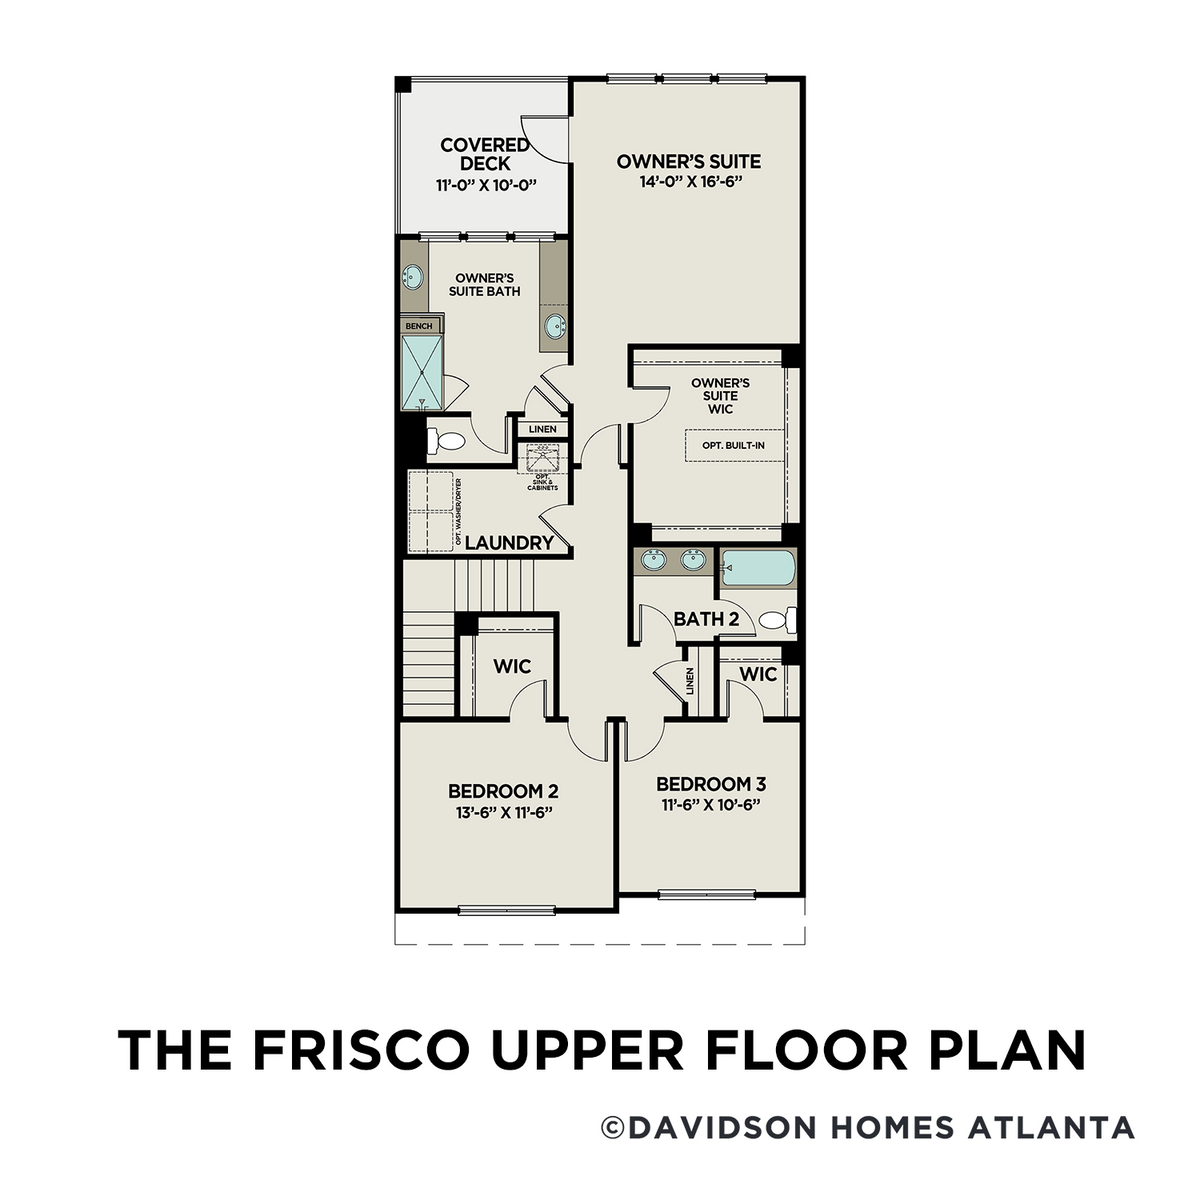 2 - The Frisco C floor plan layout for 691 Stickley Oak Way in Davidson Homes' The Village at Towne Lake community.